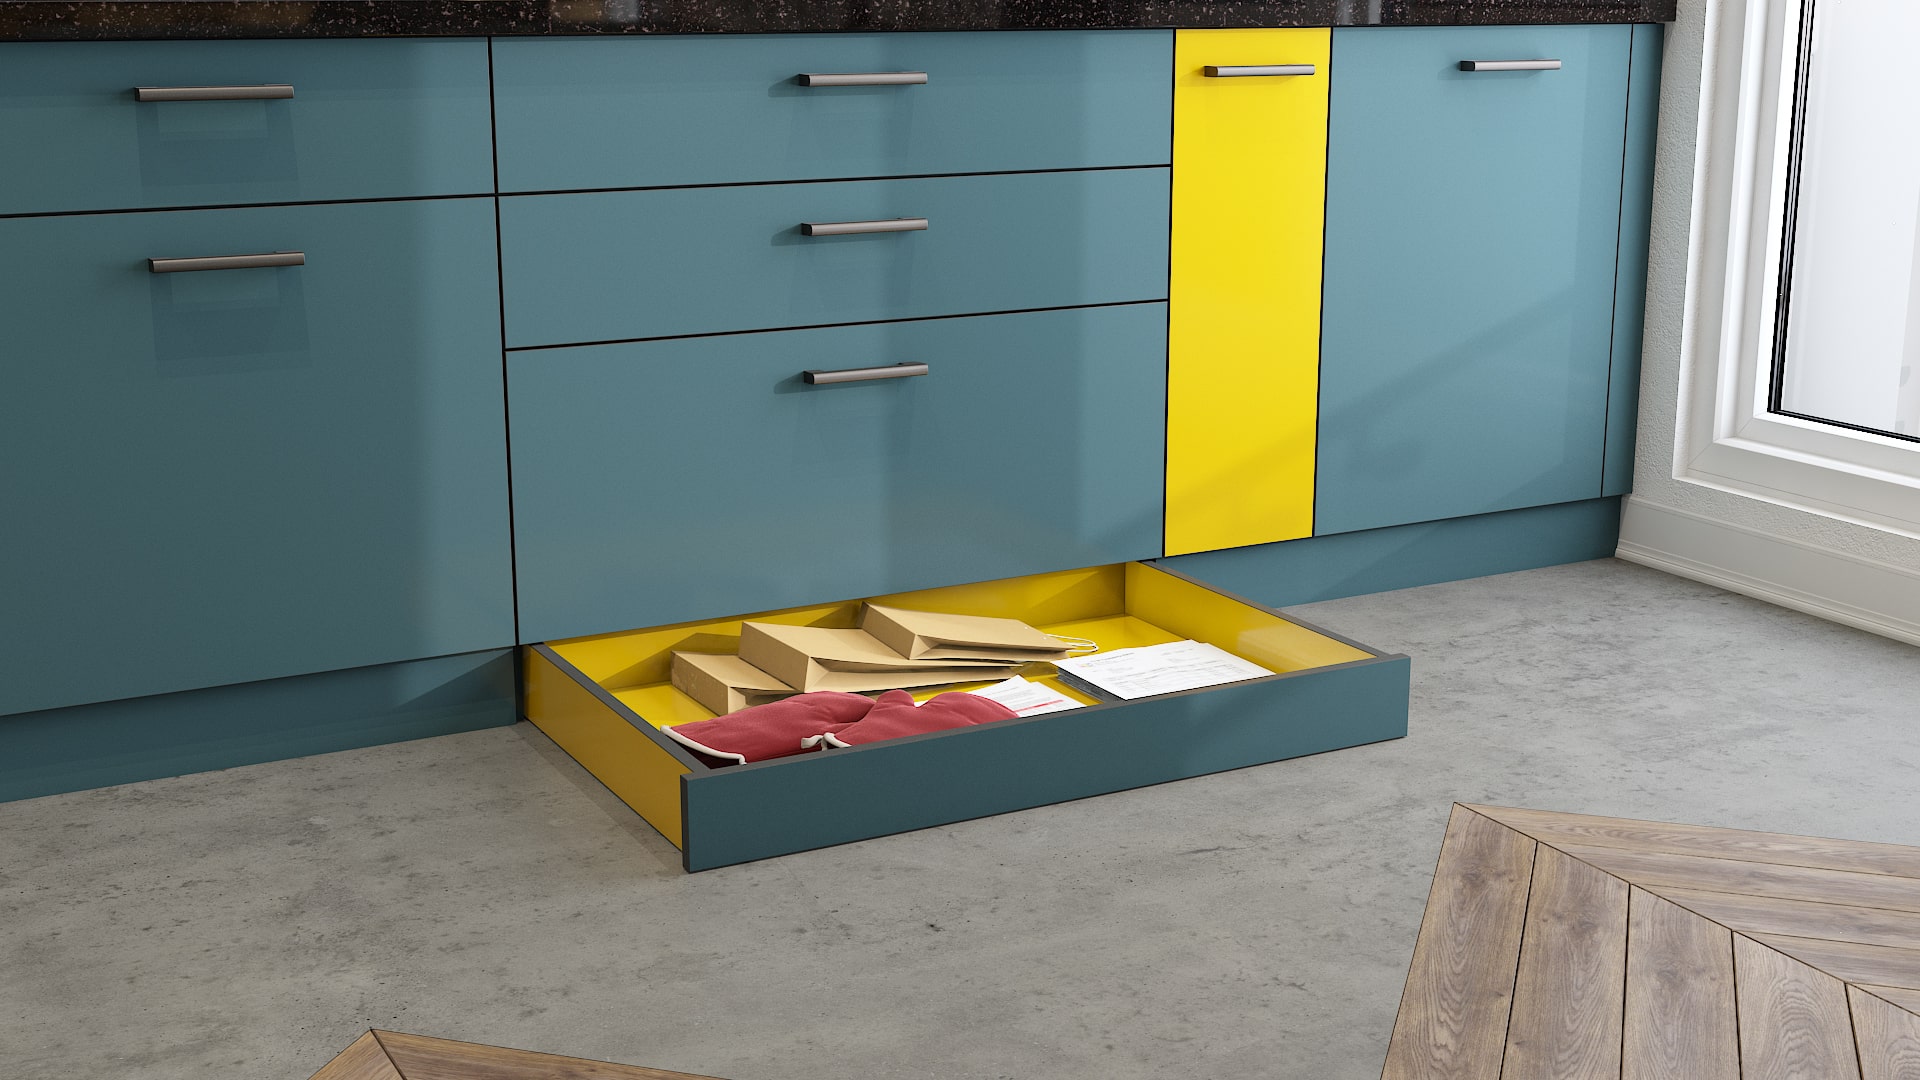 Maximize storage space in your modular kitchen with skirting drawers for small spaces